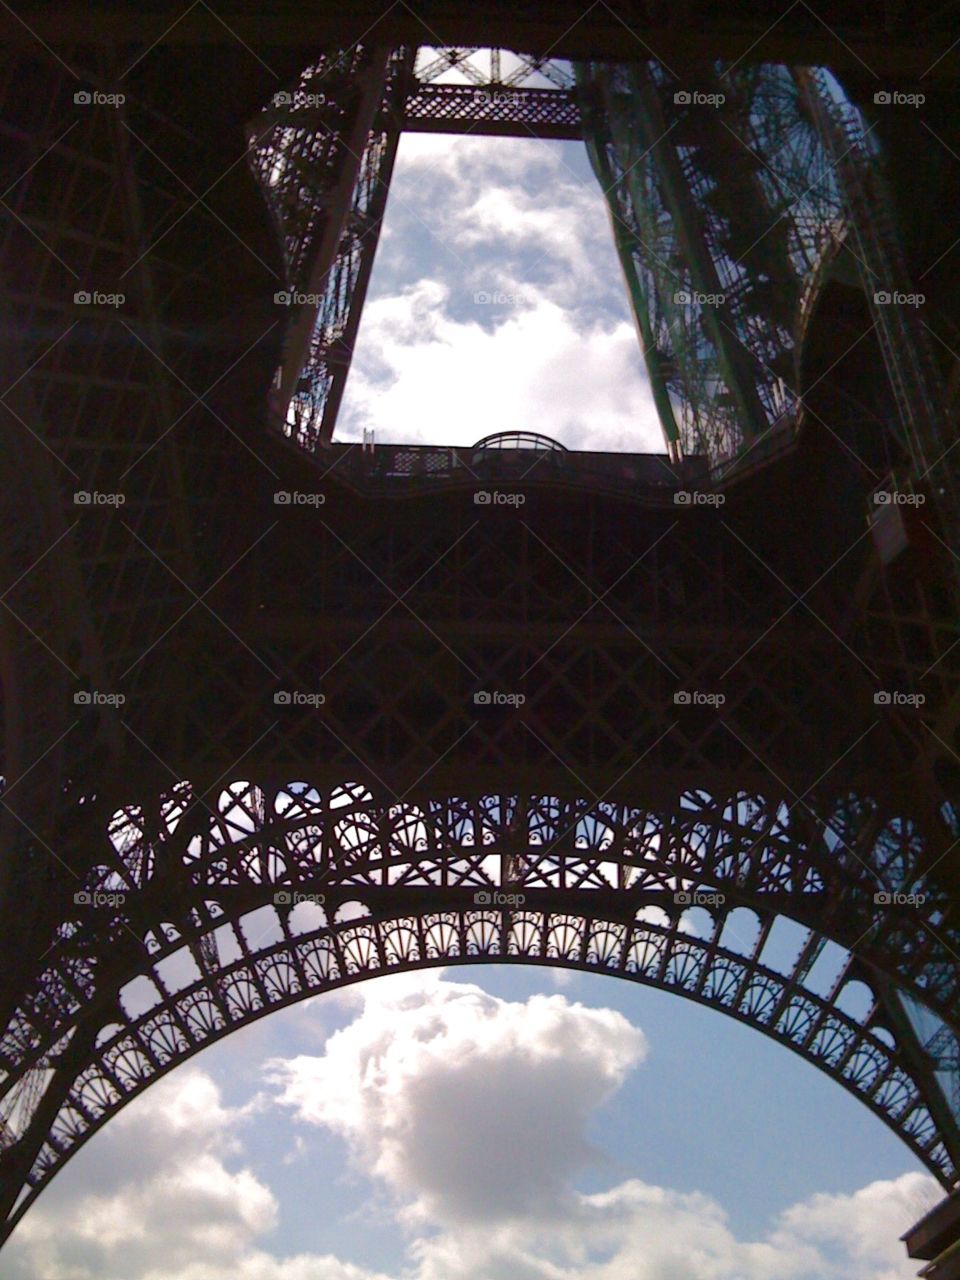 Under the Eiffel Tower. Arches of the Eiffel viewed from below